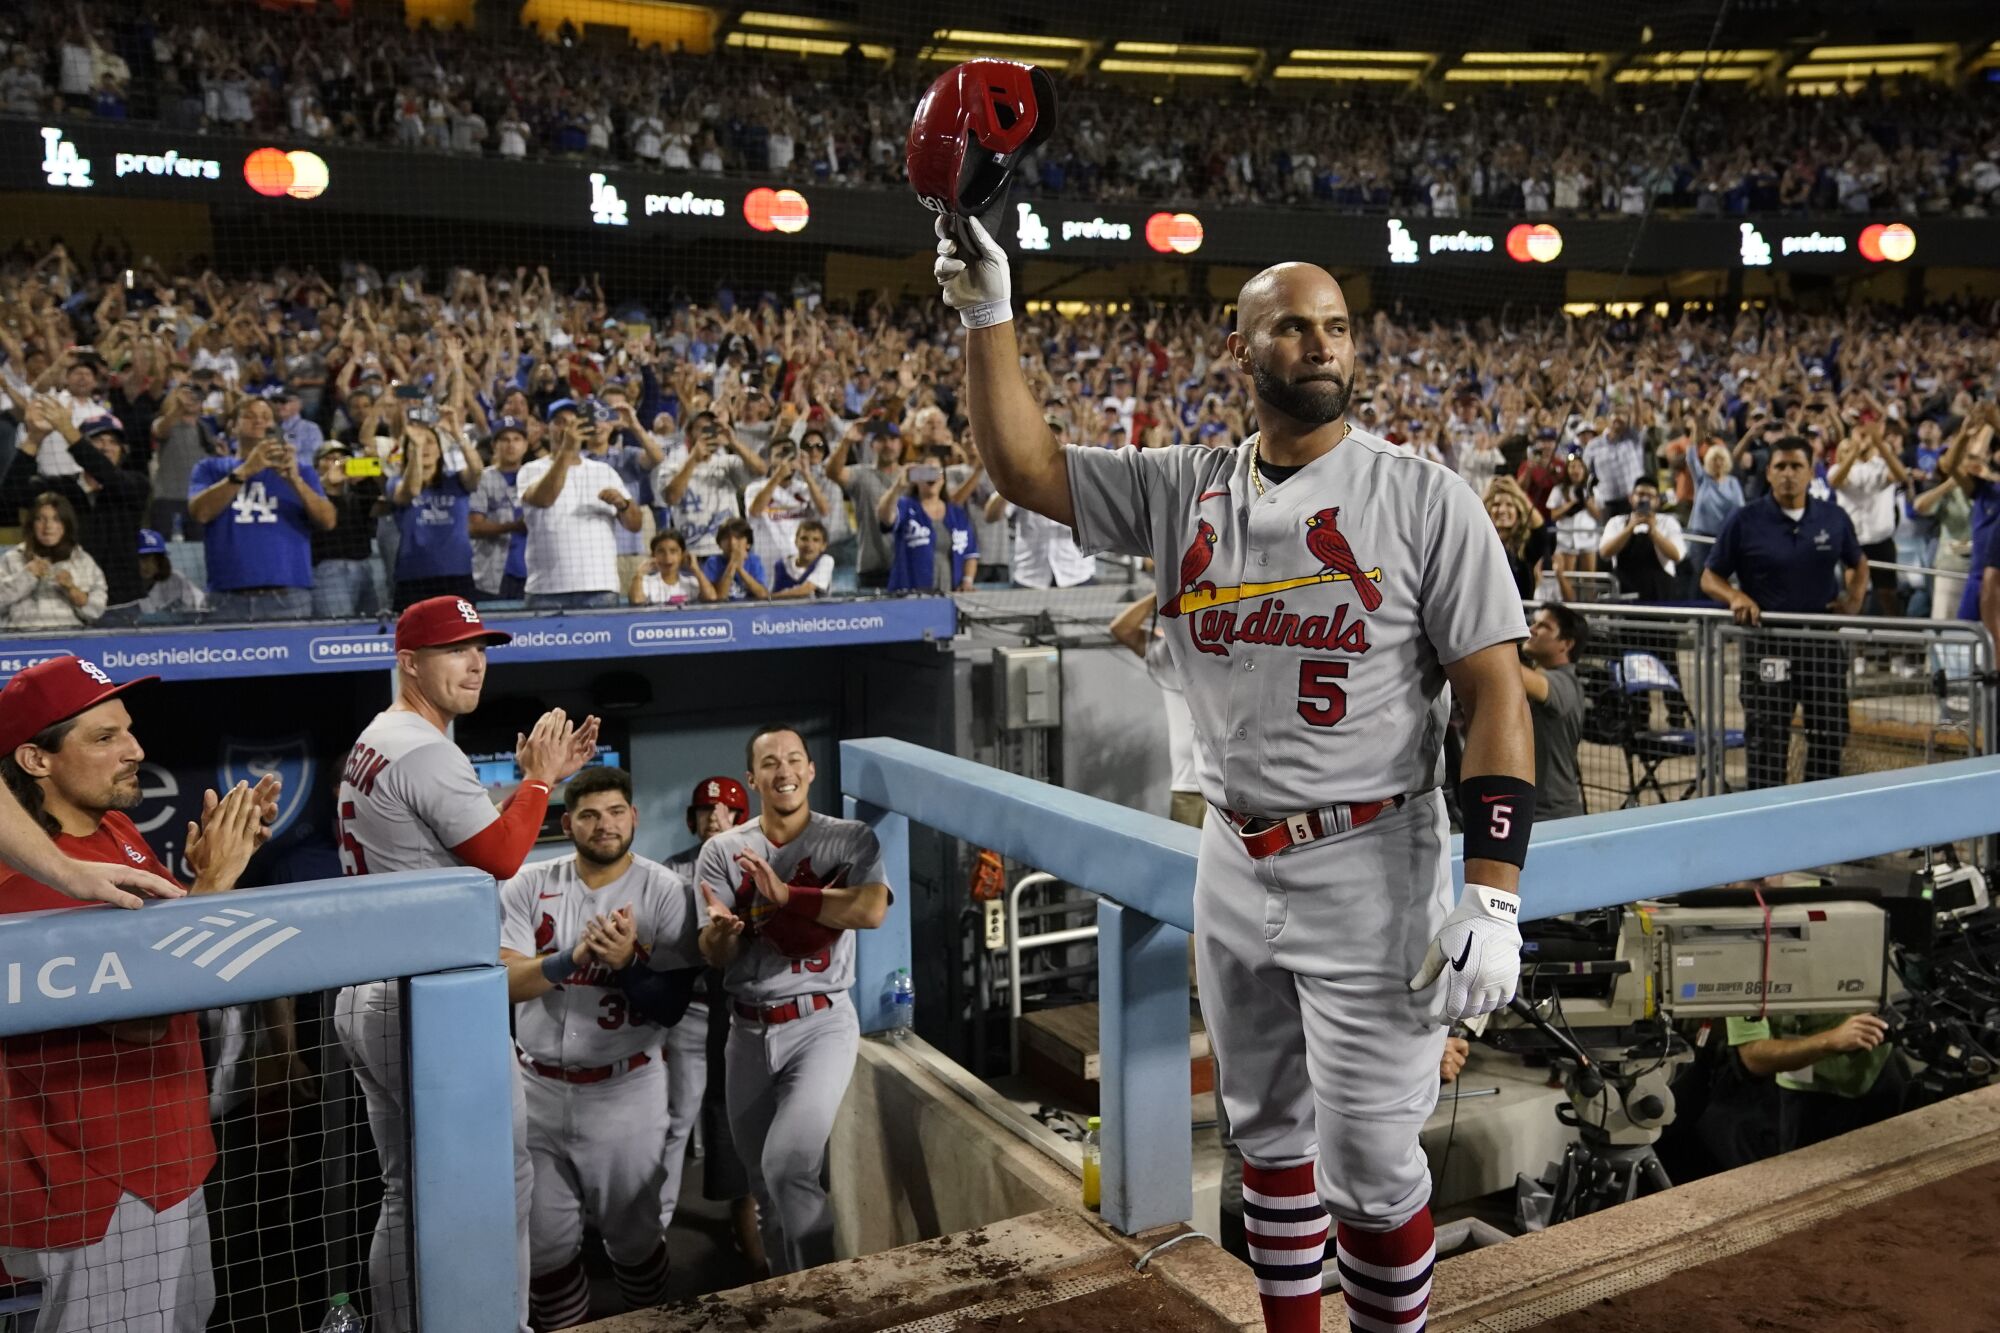 St. Louis Cardinals designee Albert Pujols waves to the fans as he is honored.